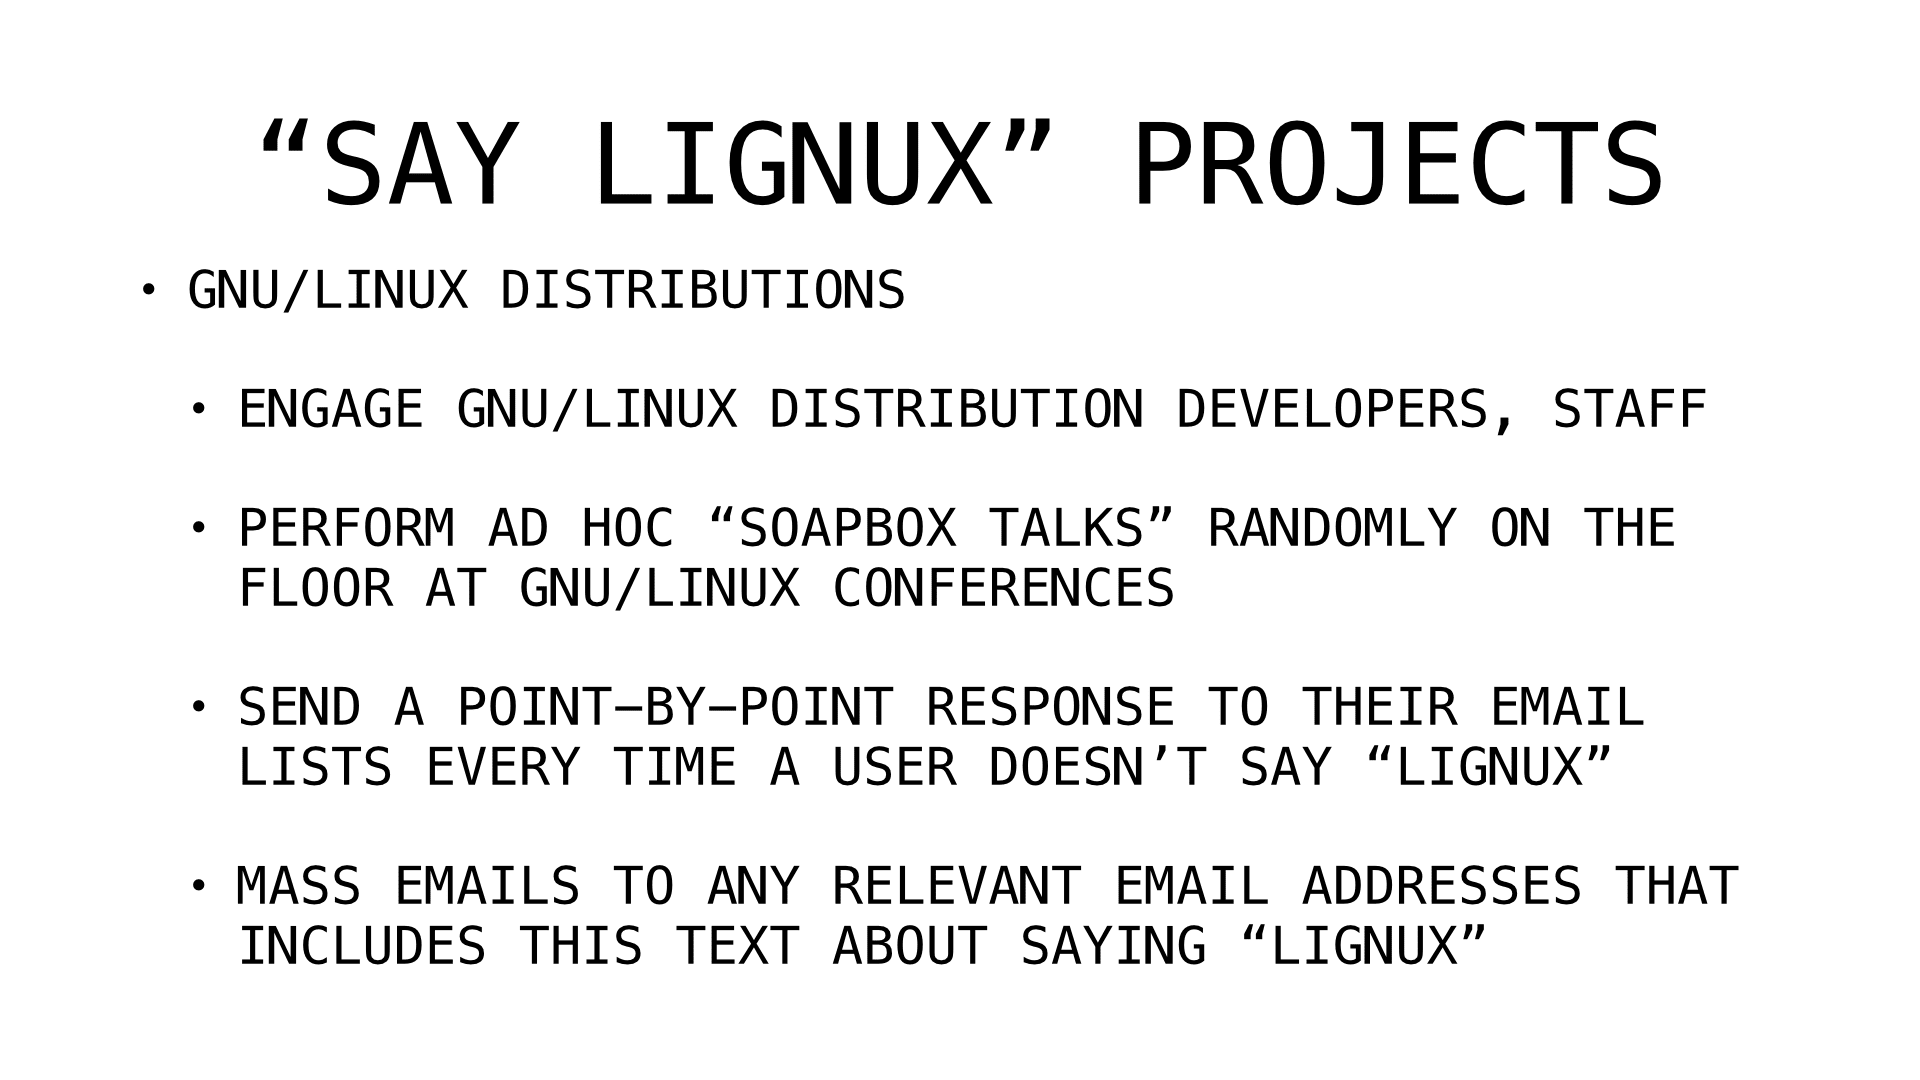 say lignux projects 3